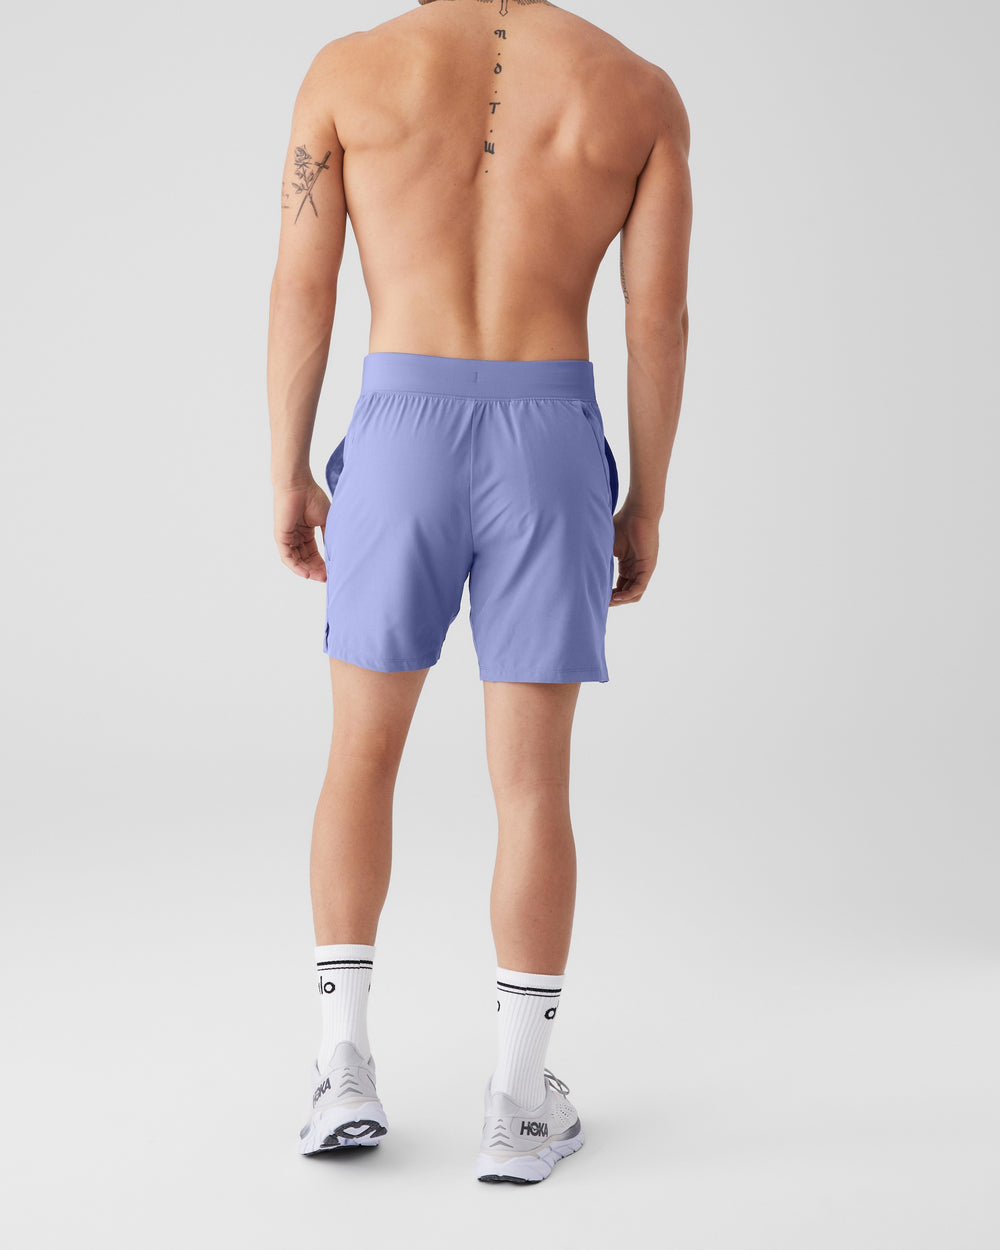 Alo Yoga Repetition Short 7" - Unlined